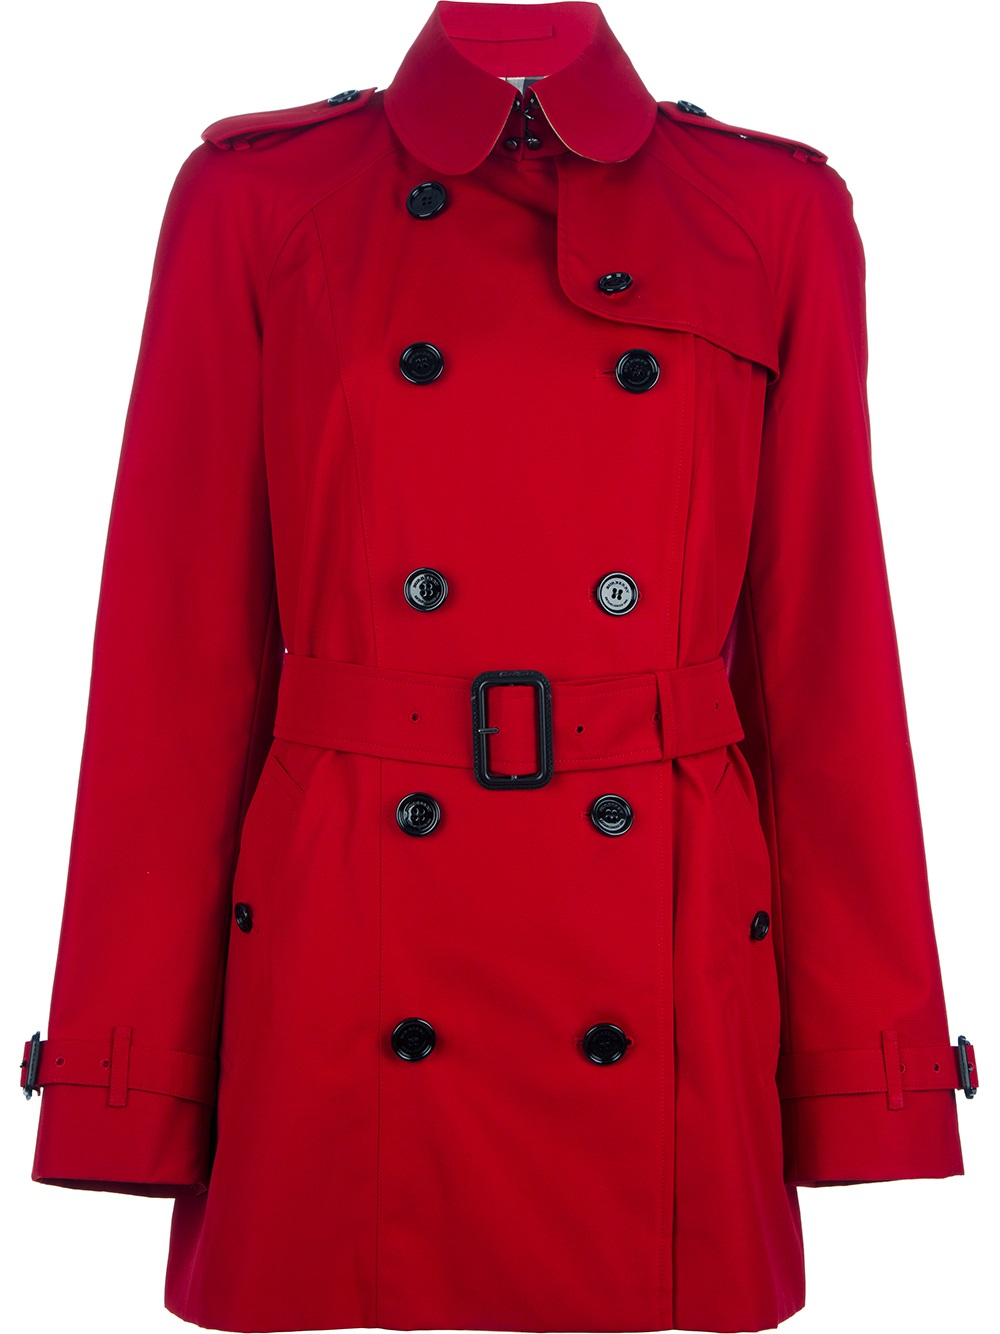 Burberry prorsum Double Breasted Trench Coat in Red | Lyst